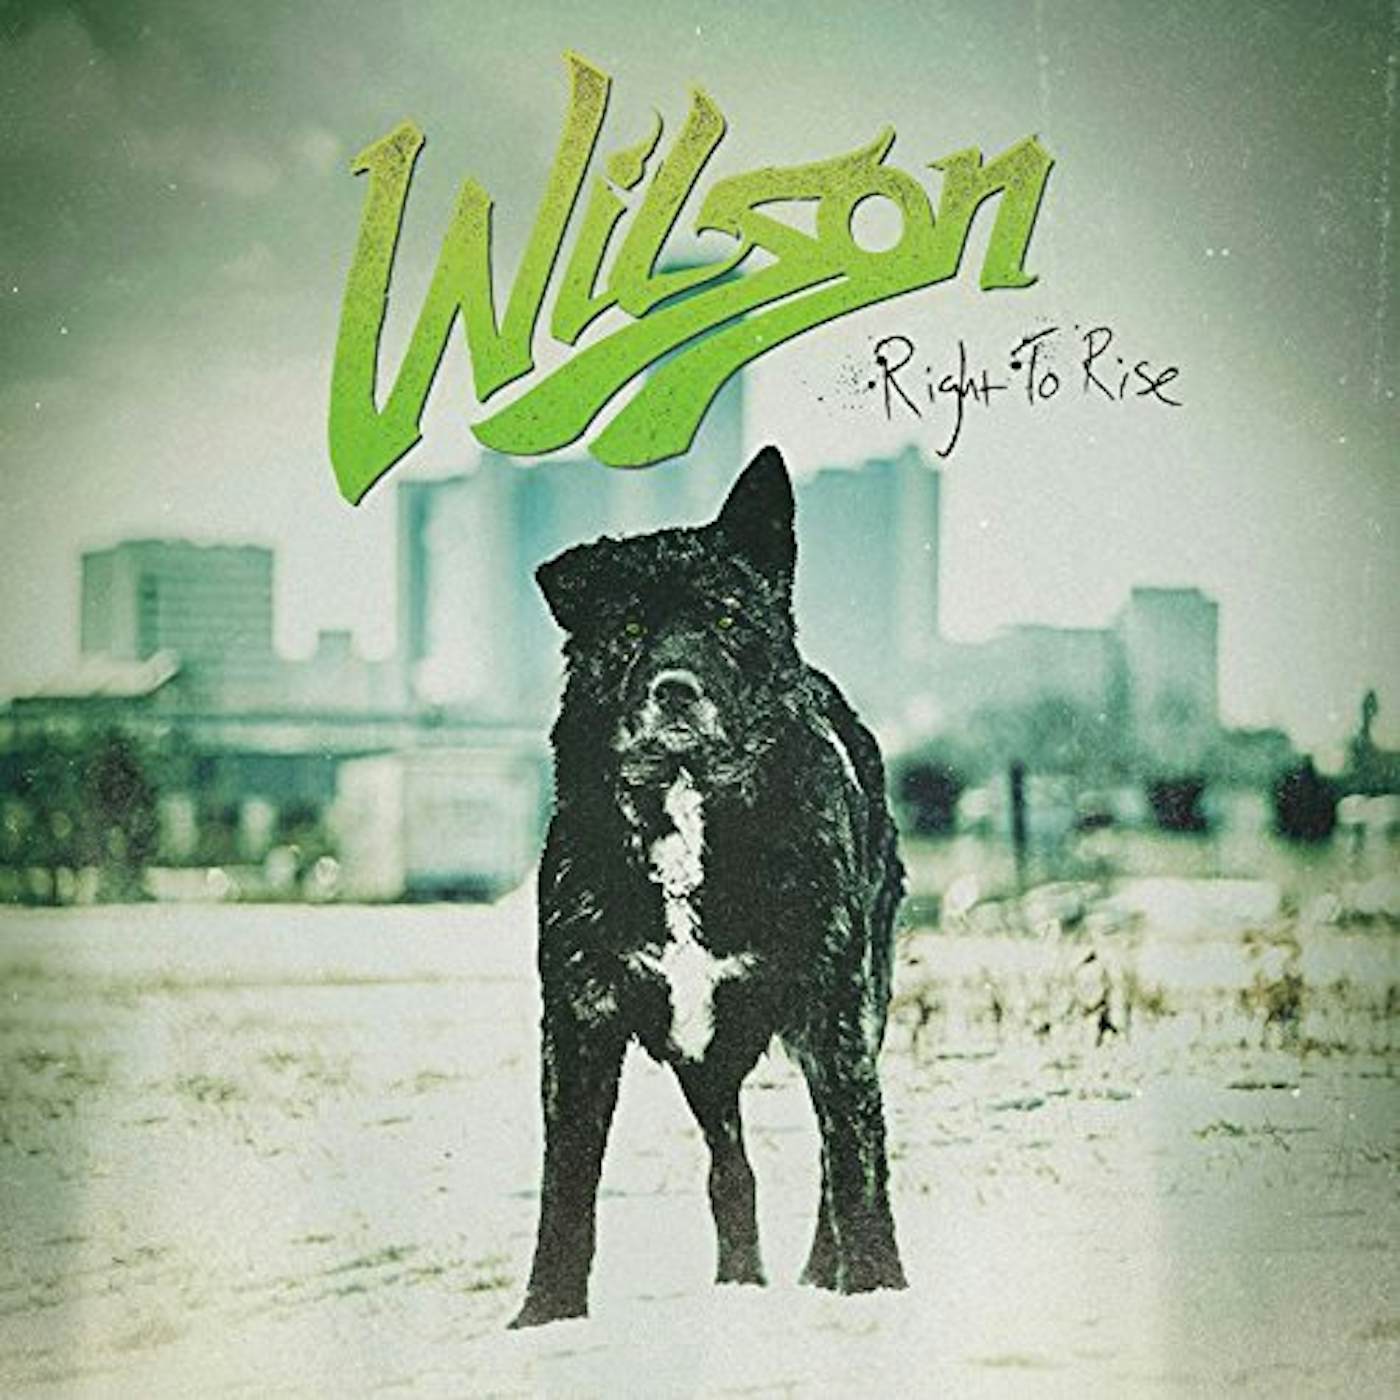 Wilson Right To Rise Vinyl Record